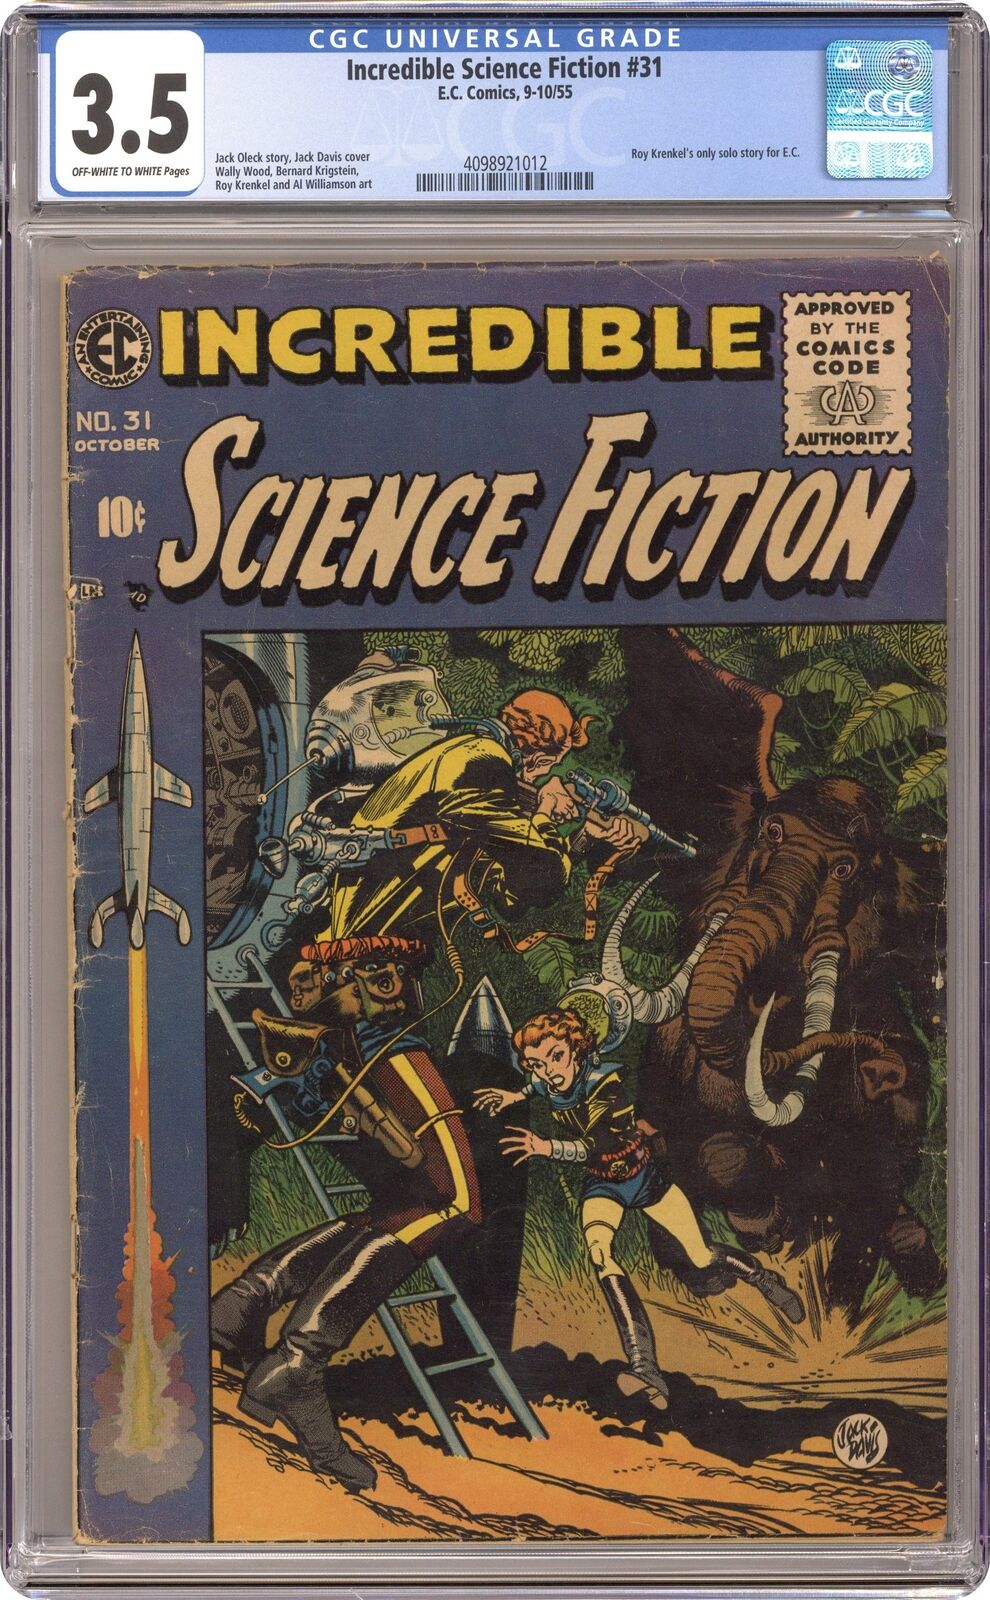 Incredible Science Fiction #31 CGC 3.5 1955 4098921012